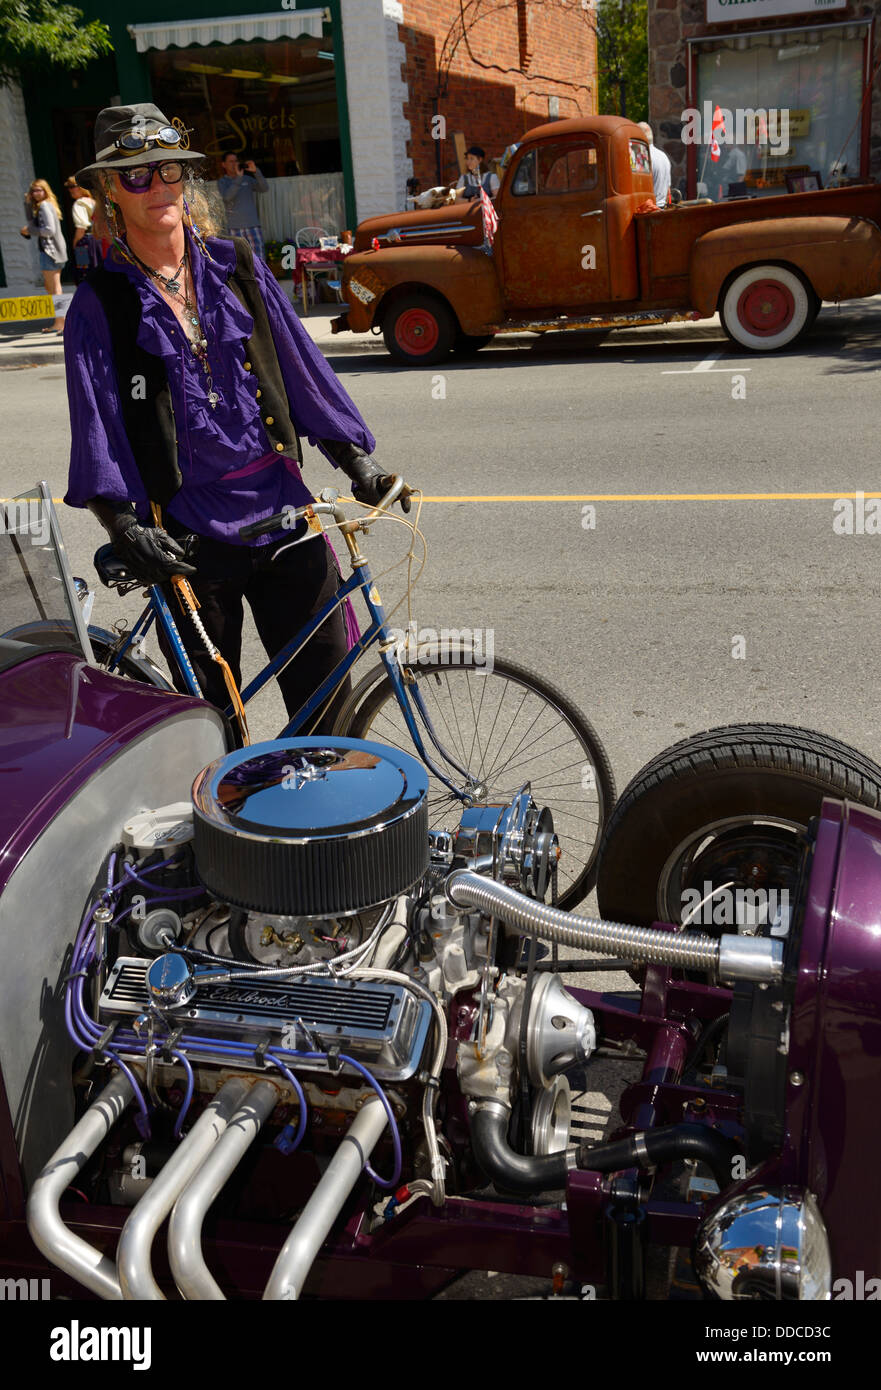 Coldwater purple steampunk participant with a hot rod and rusted Ford truck in background Stock Photo